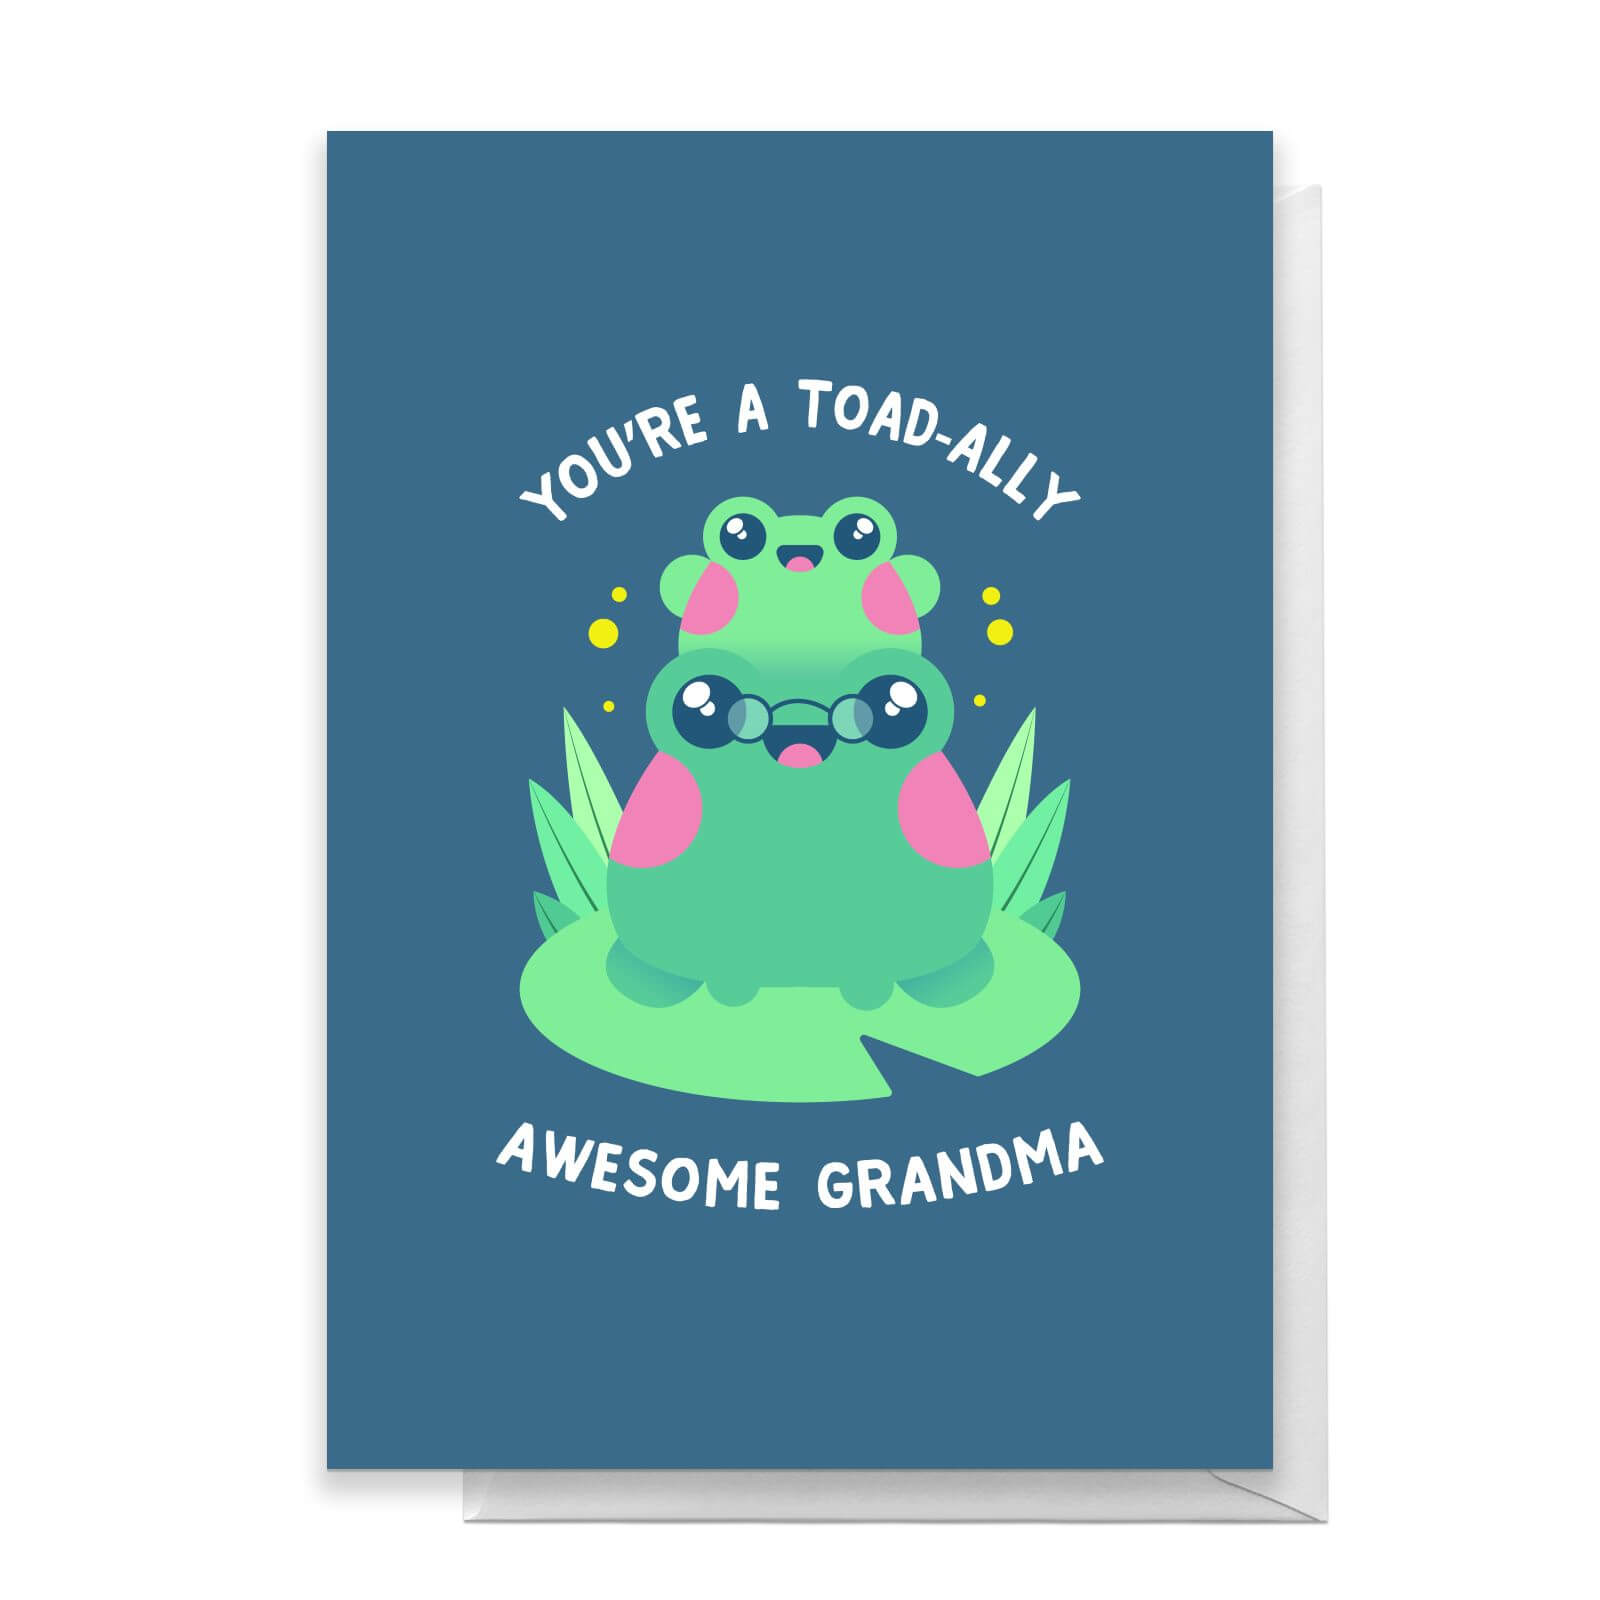 You're A Toad-ally Awesome Grandma Greetings Card - Standard Card